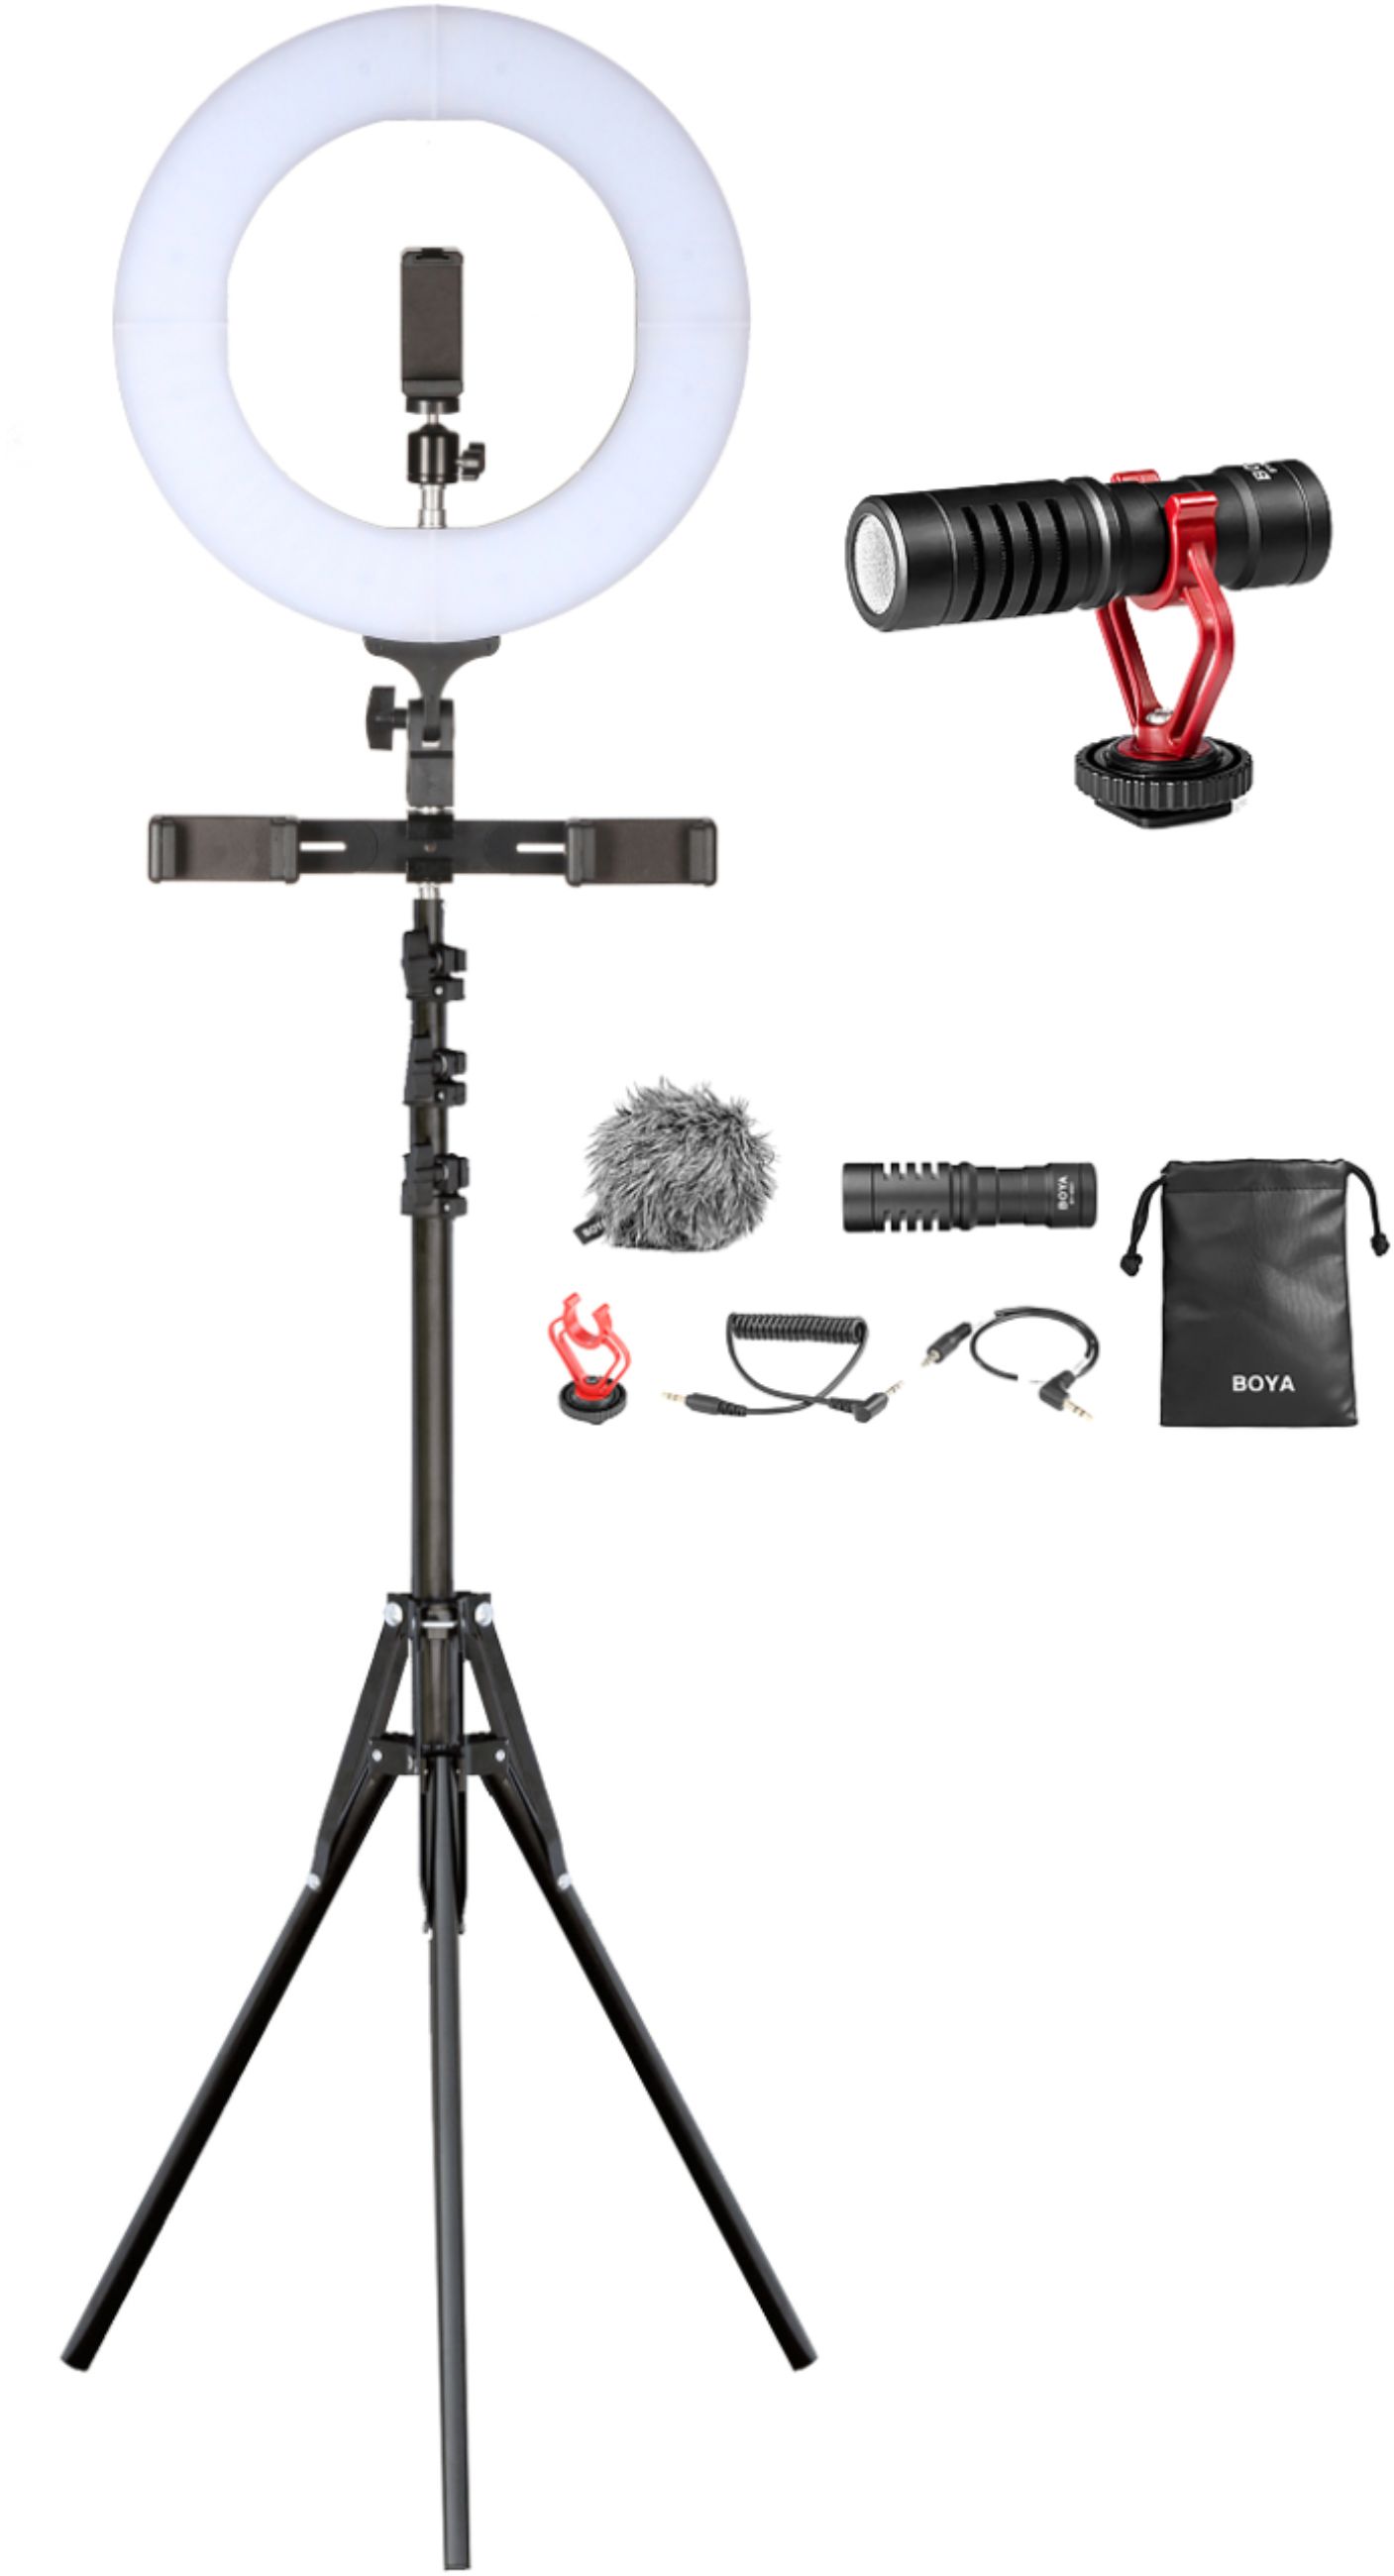 Sunpak - Ultimate Vlogging Kit with BOYA Cardioid Microphone for Smartphones and Cameras - Black